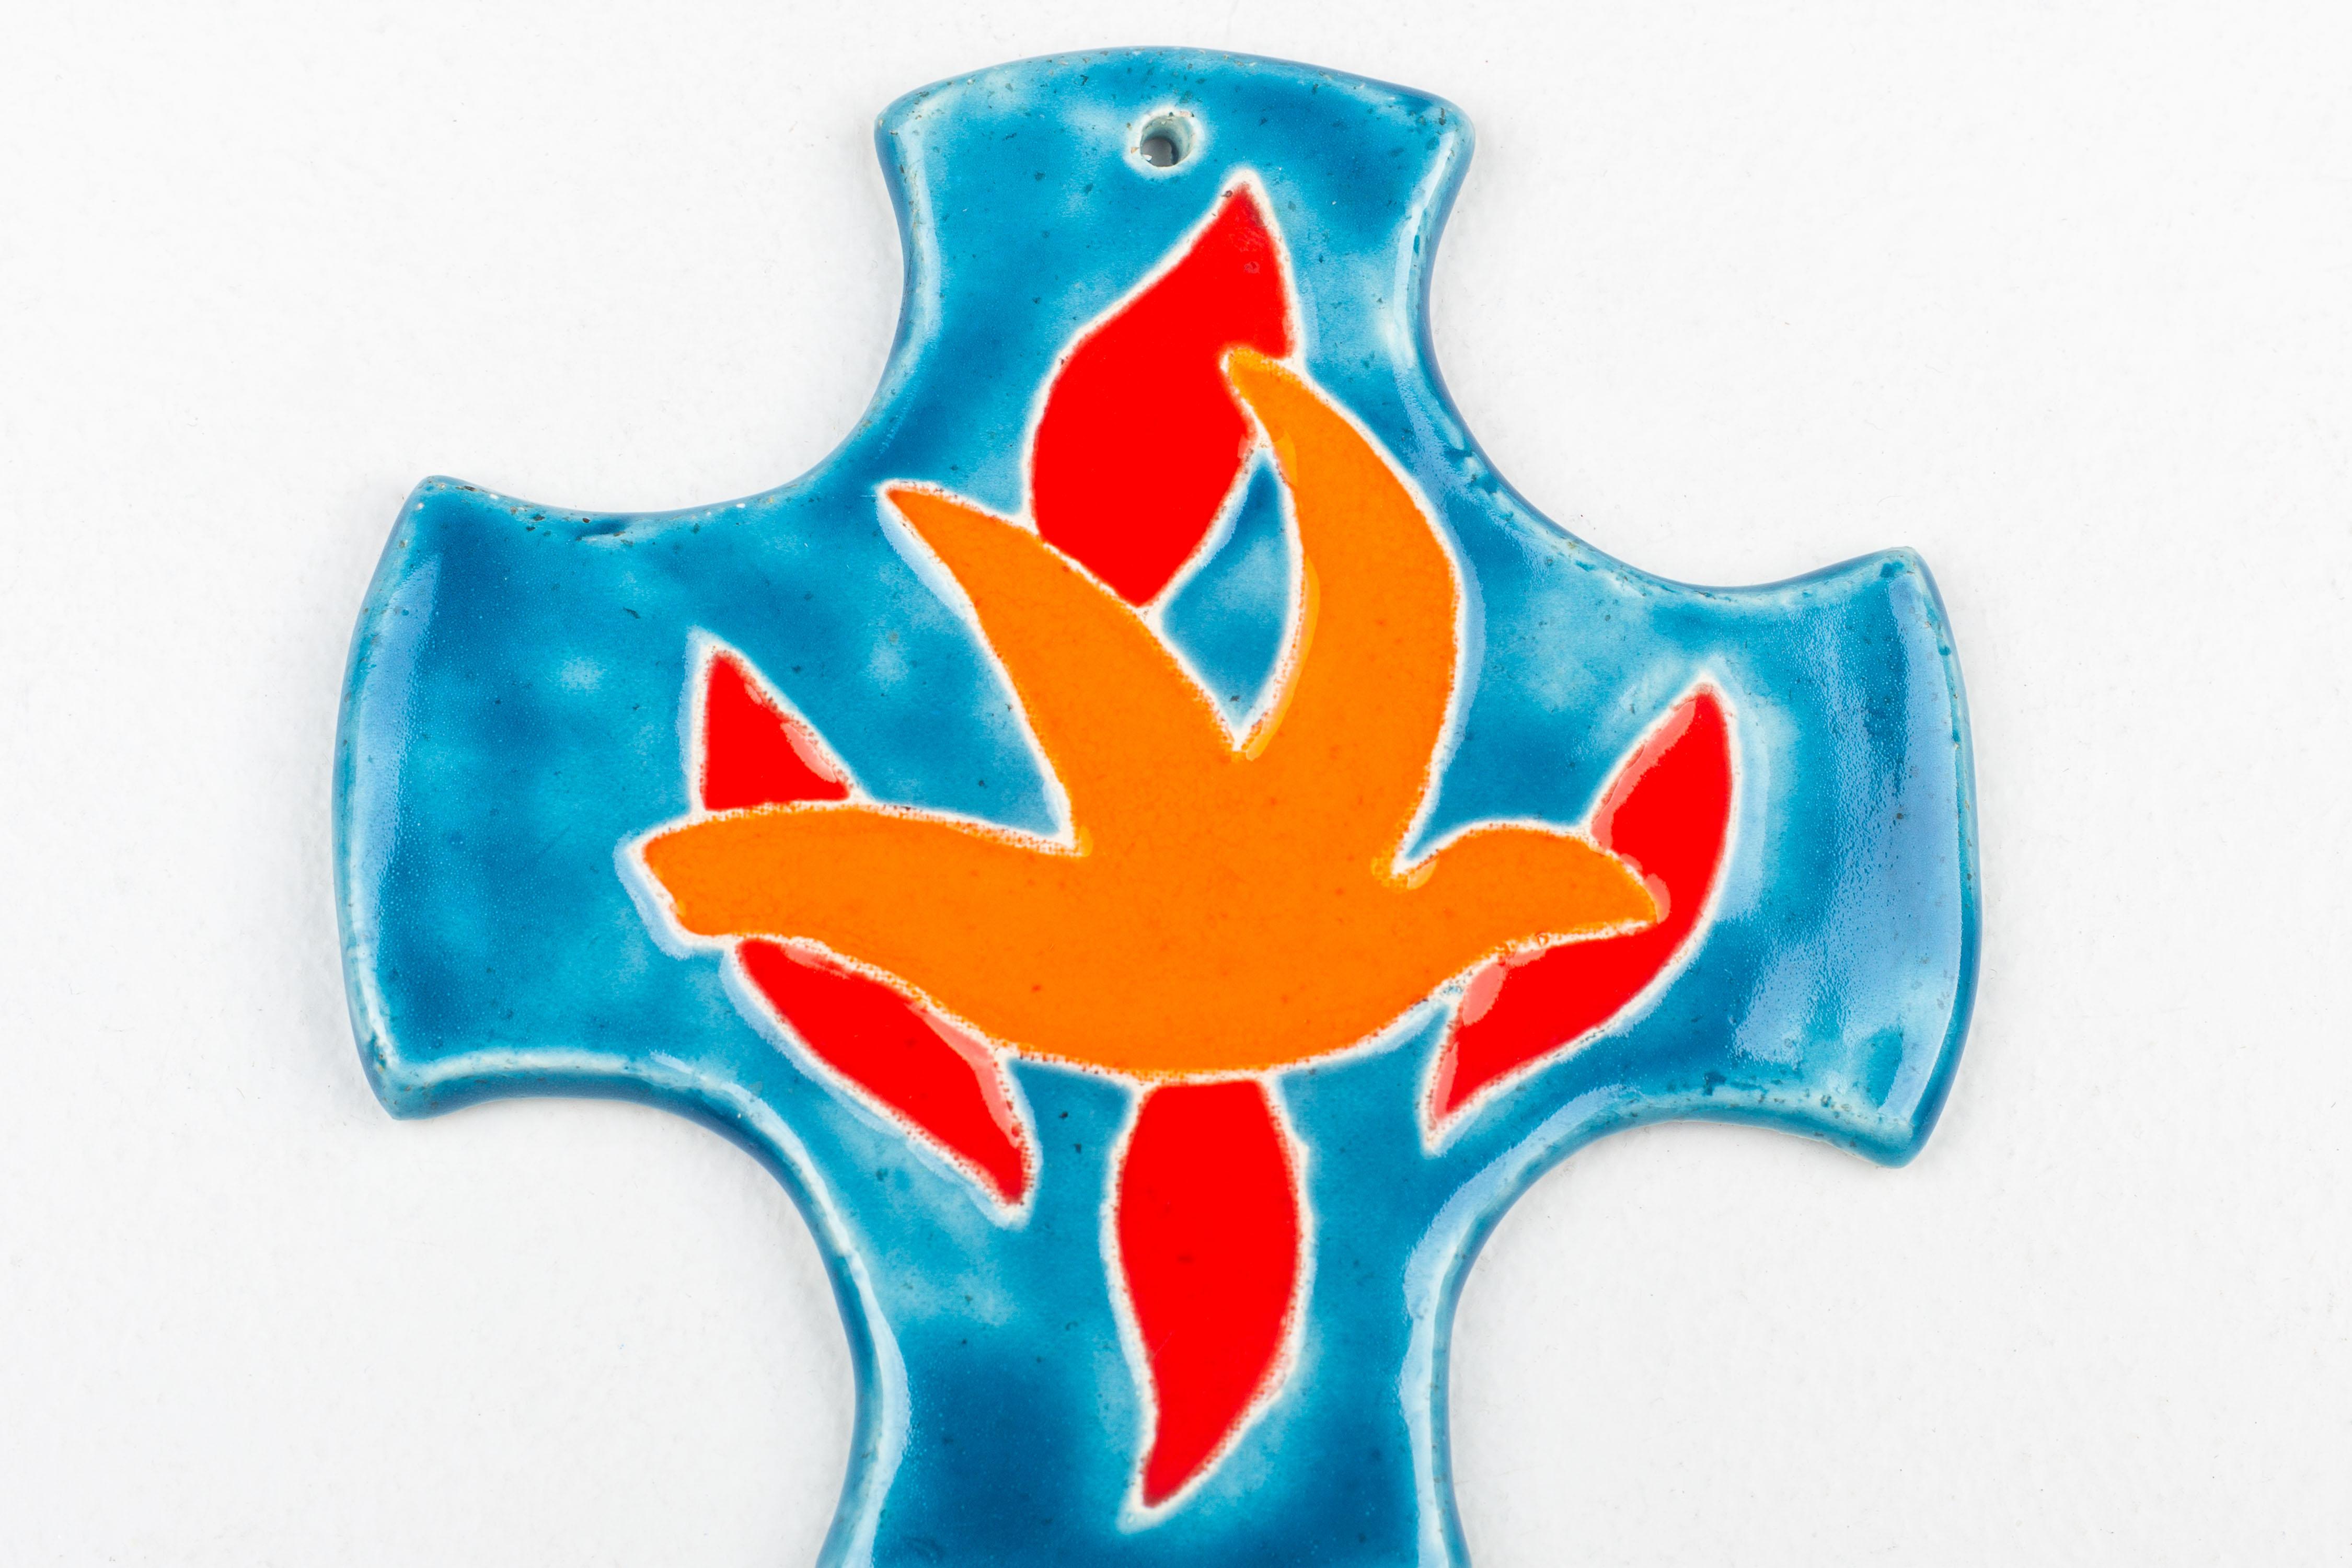 This ceramic cross is a dynamic representation of mid-century modern artistry, crafted by the skilled hands of a studio pottery artist in Europe. The cross's design features a central flame motif, executed in a bold orange-red glaze that symbolizes